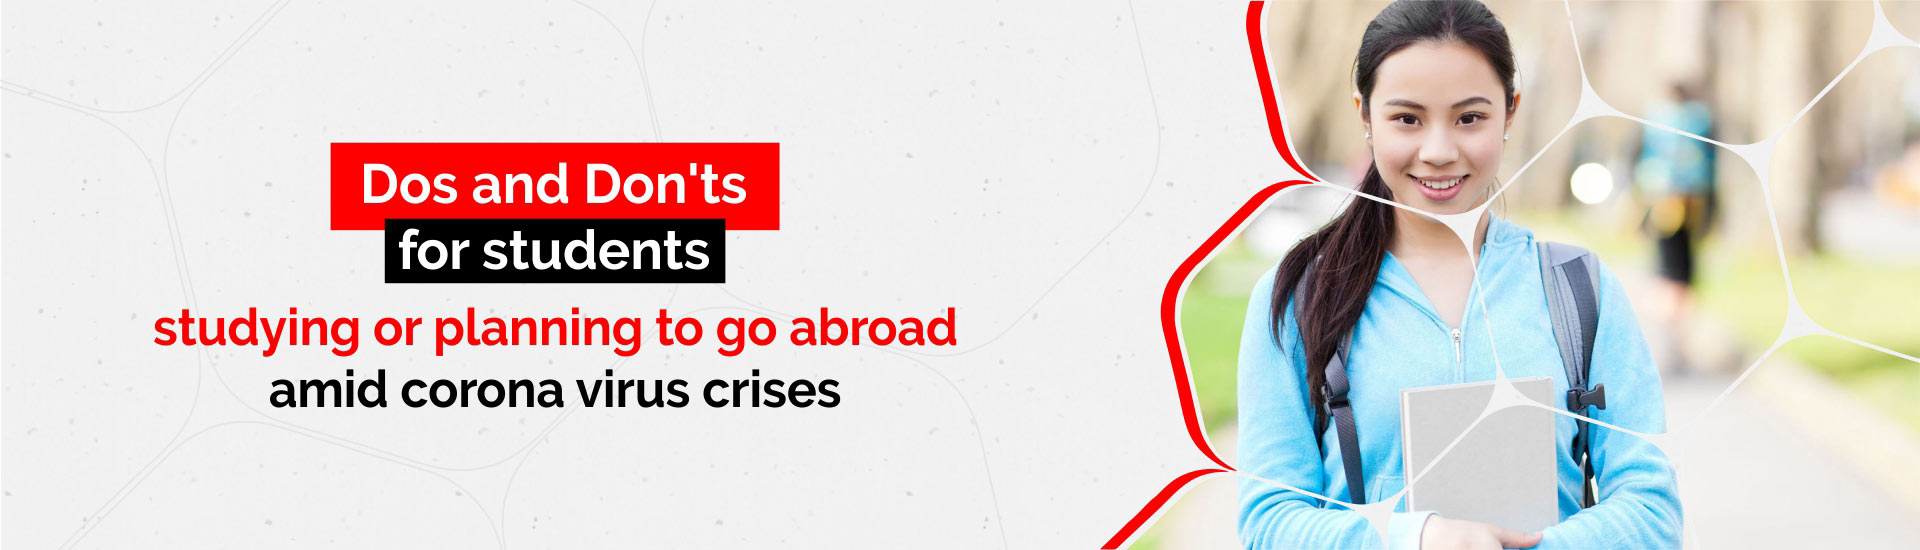 Dos and Don'ts for students studying or planning to go abroad amid coronavirus crises